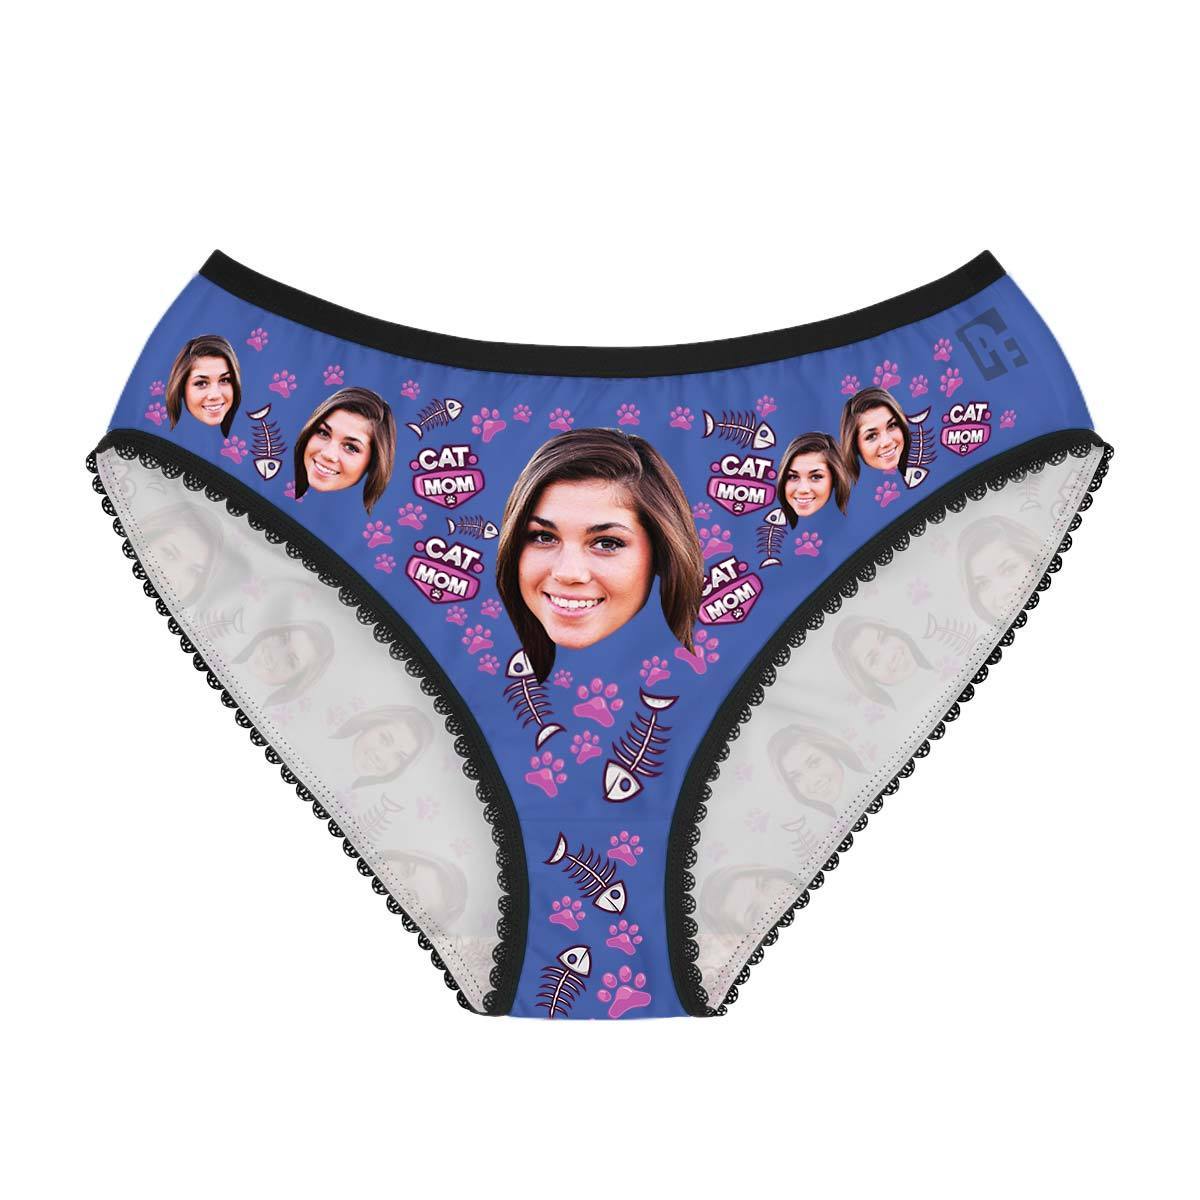 Darkblue Cat Mom women's underwear briefs personalized with photo printed on them